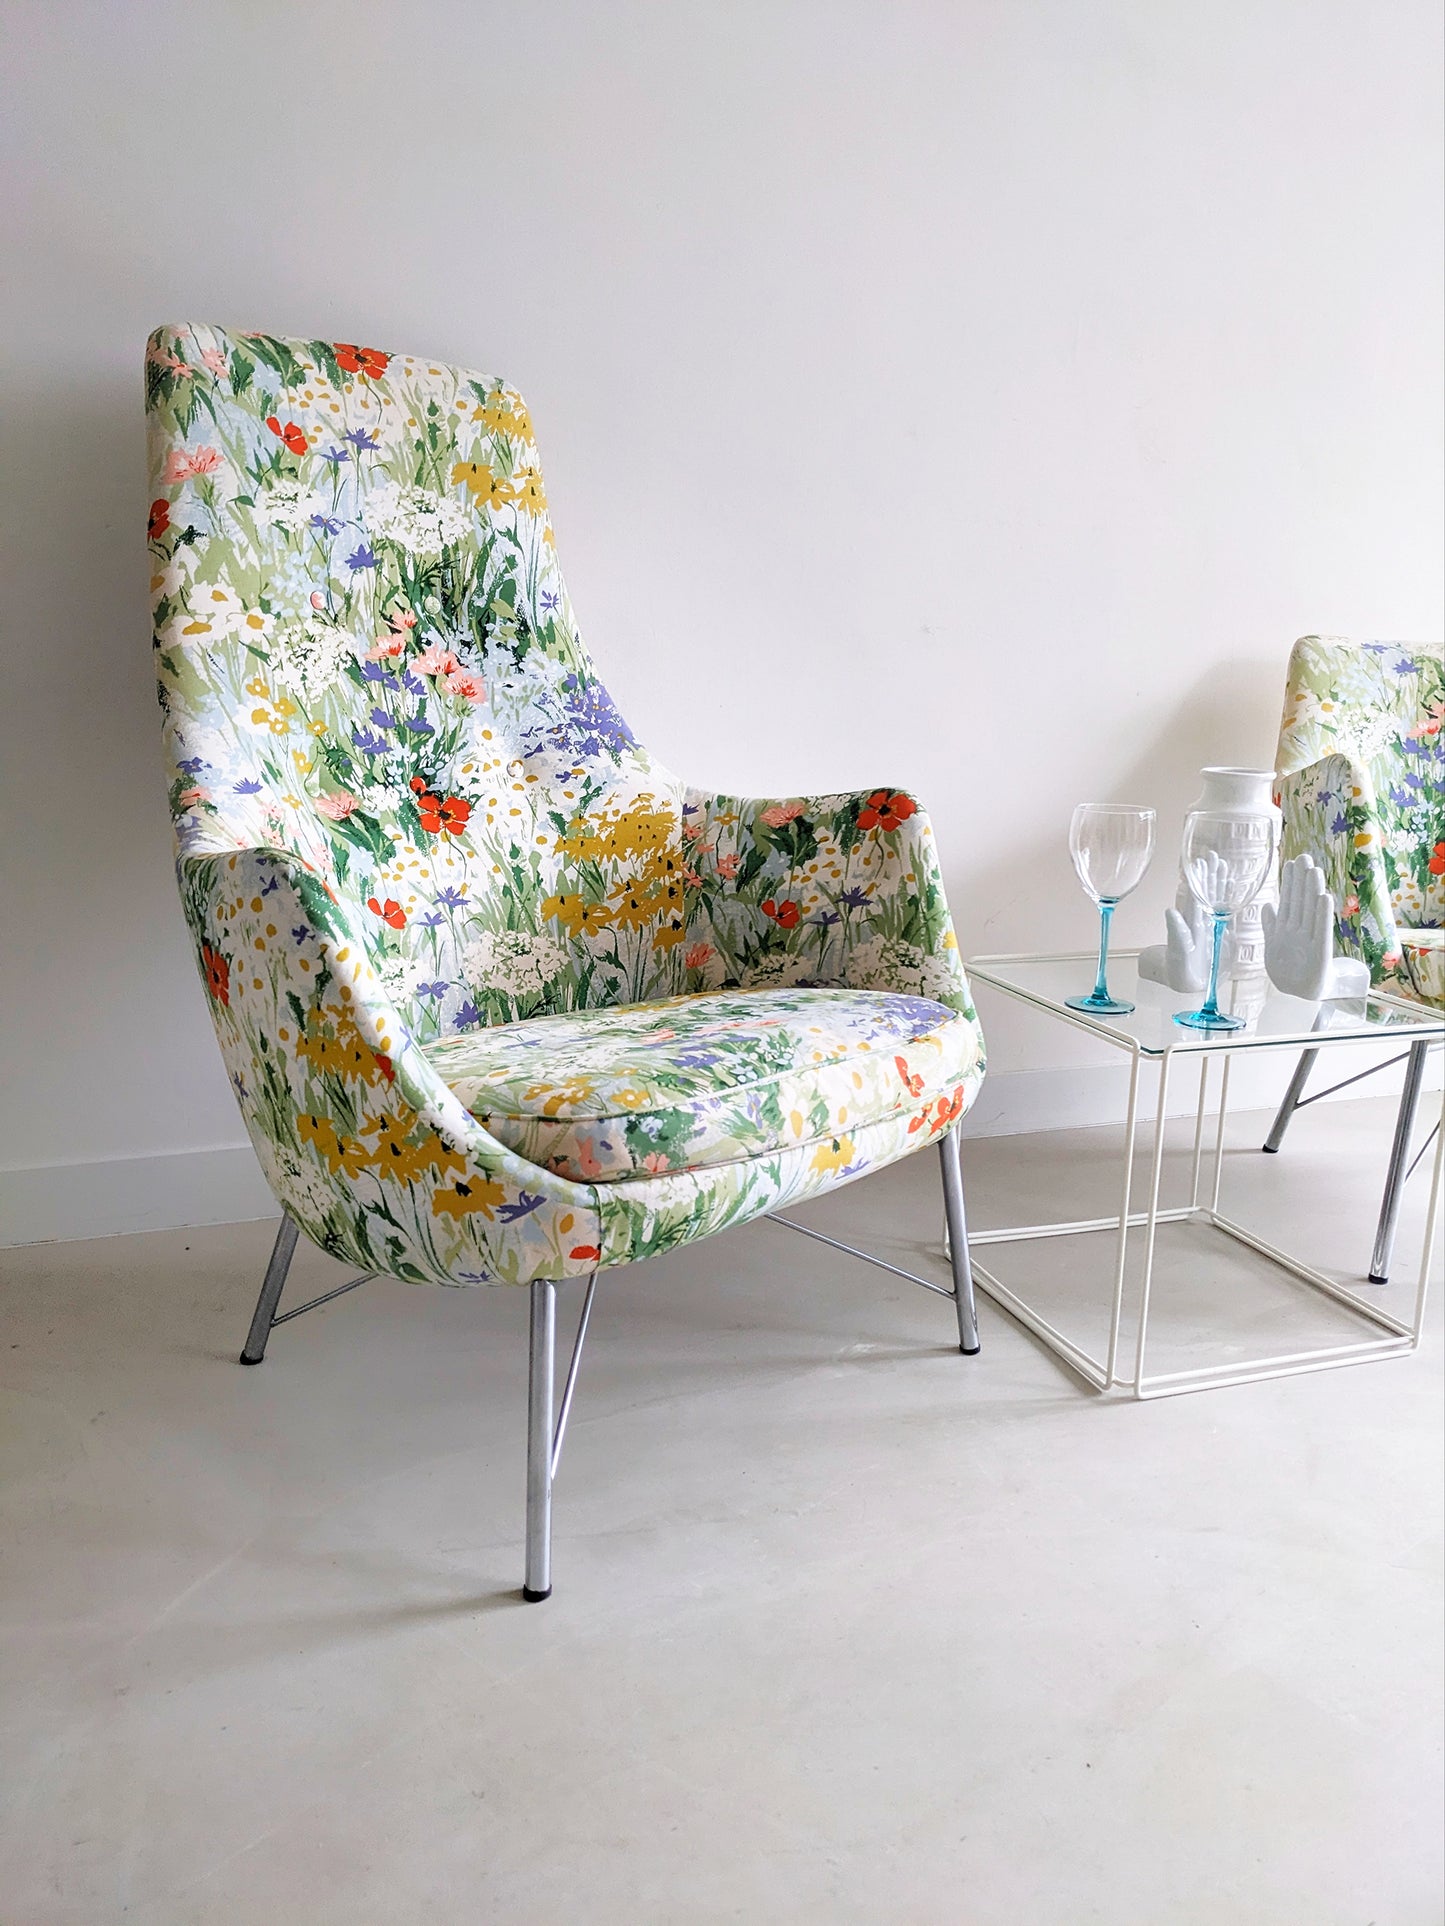 Floral Print Lounge Chairs by Karl Ekselius for Pastoe 1950's